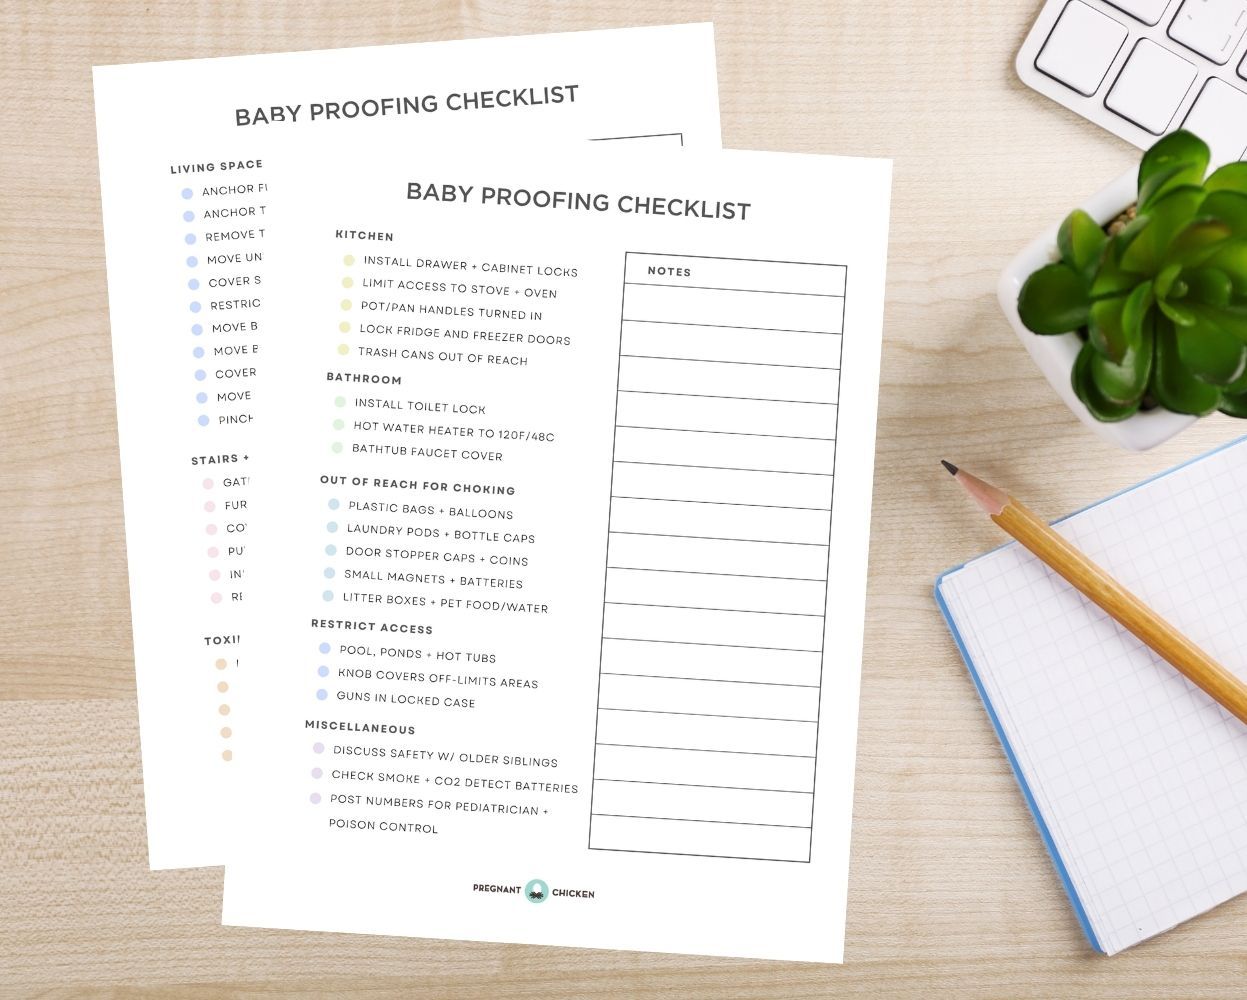 How to baby proof your home to keep your child safe - Free printable  checklist included! - Viva Veltoro